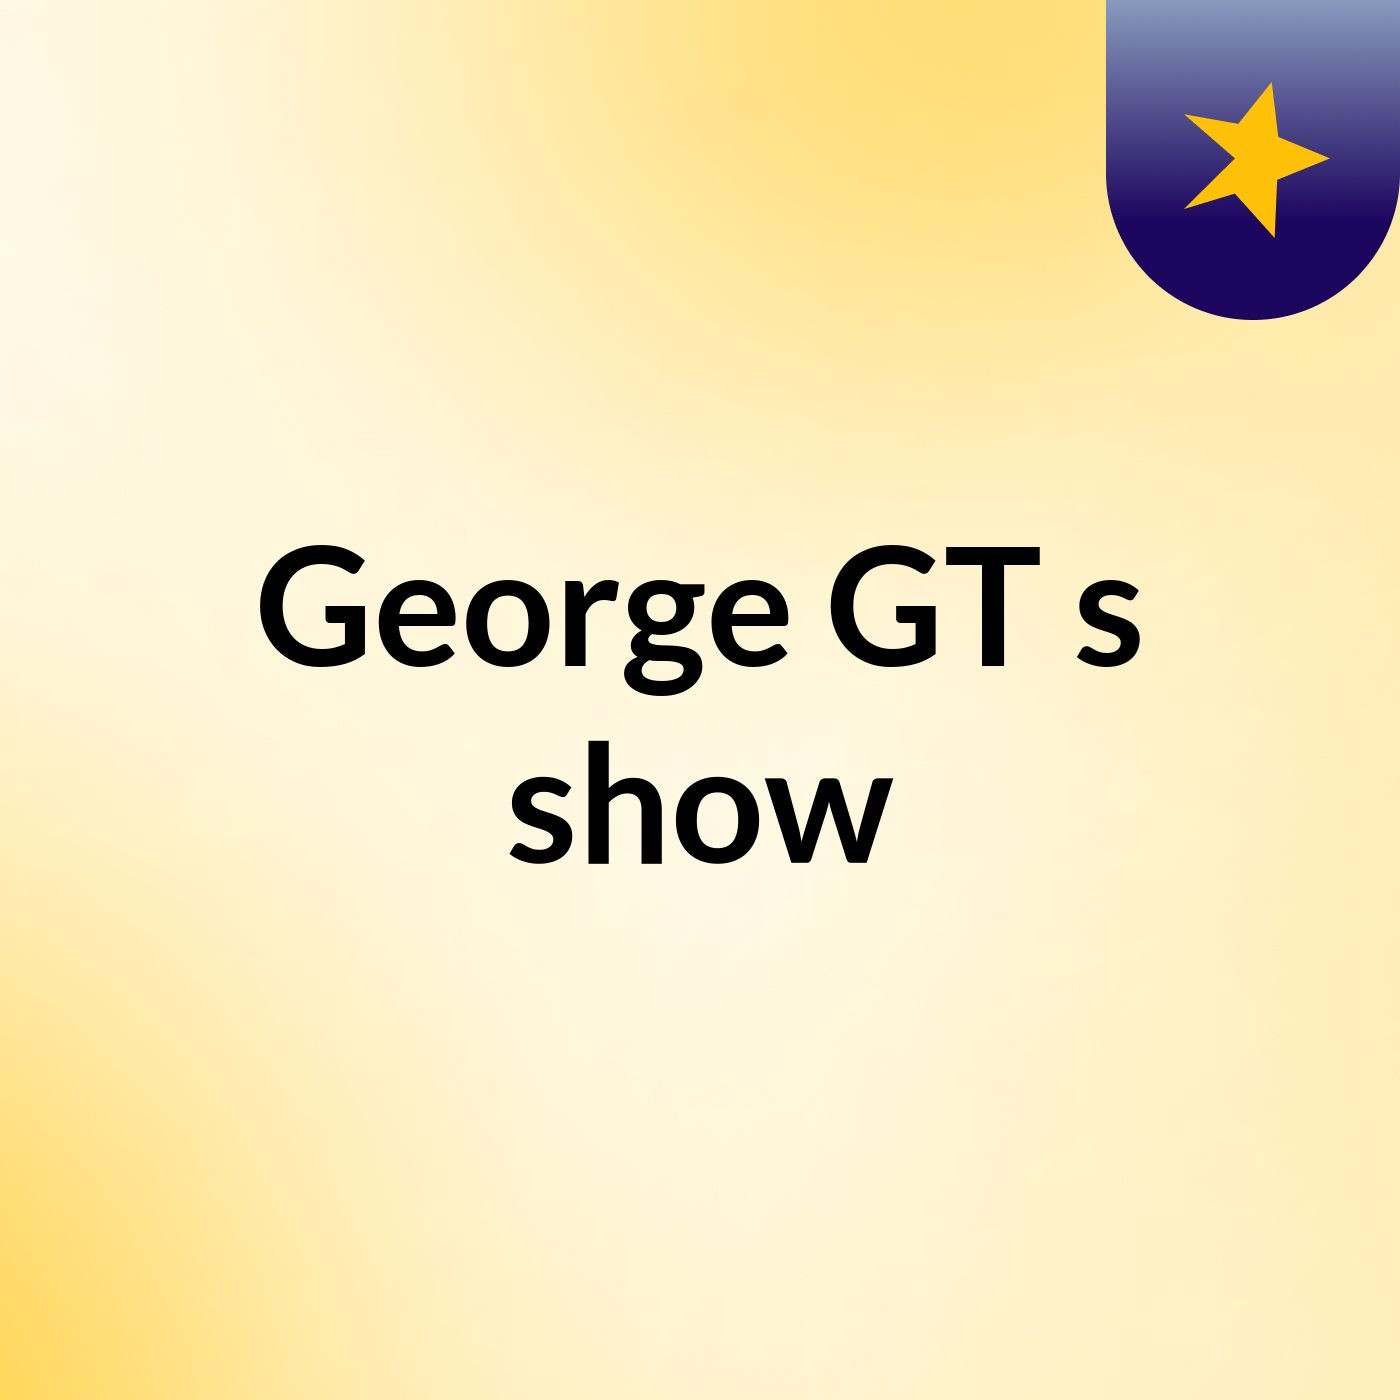 George GT's show